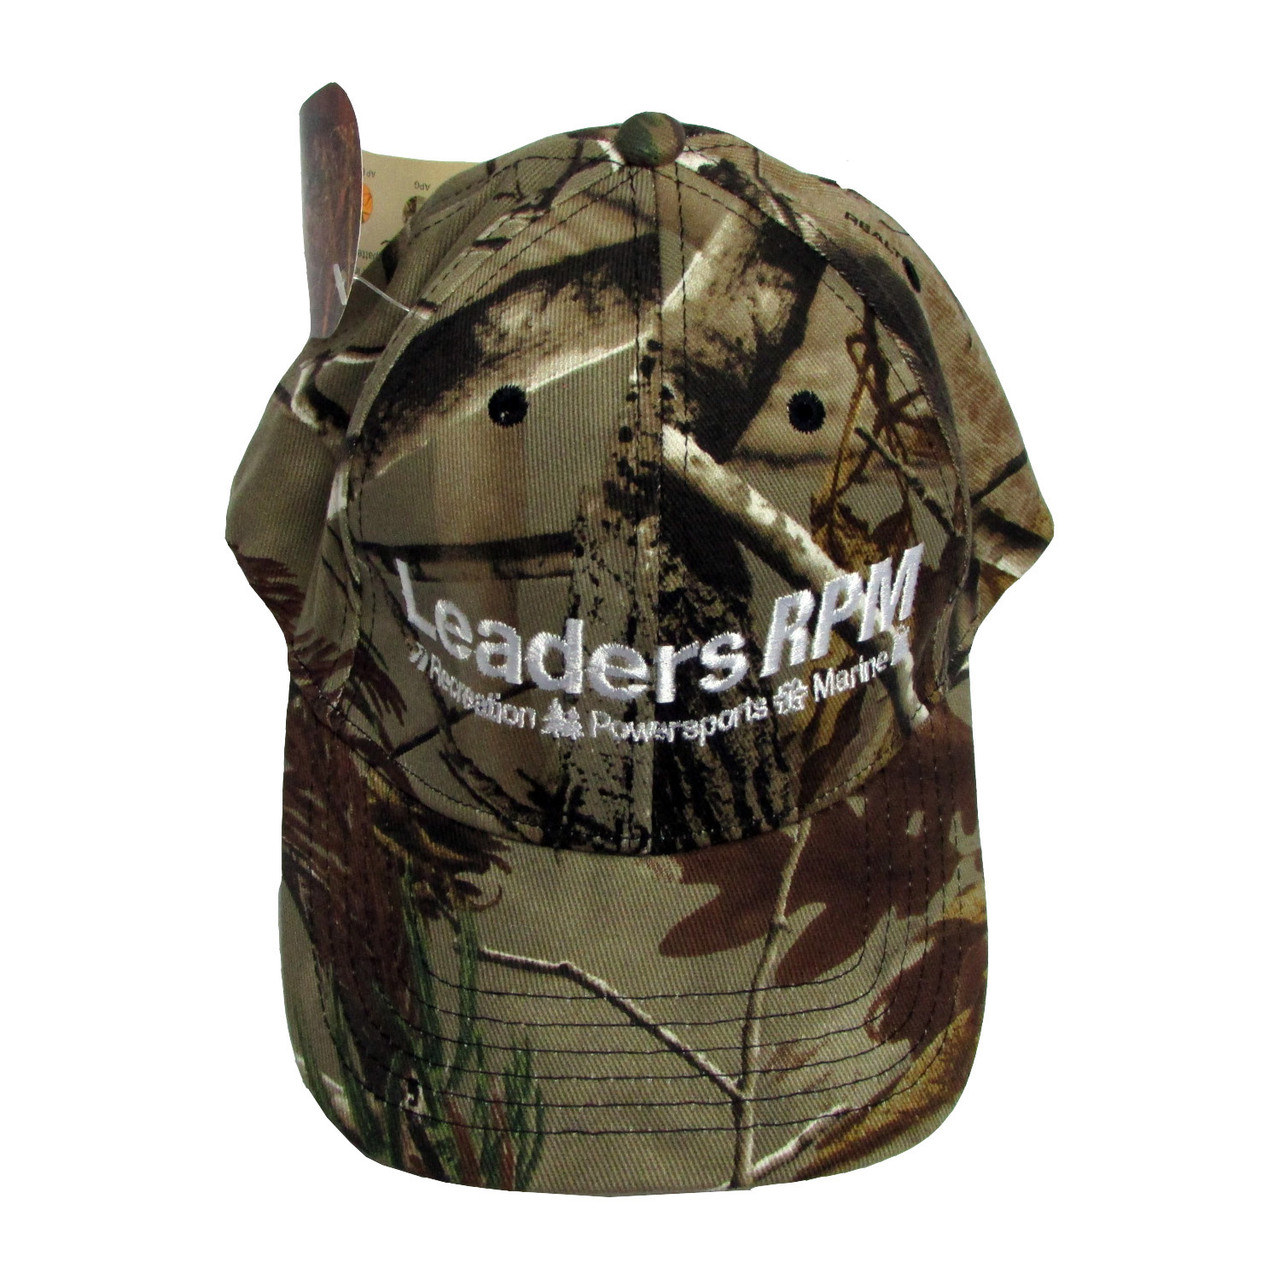 Leaders Rpm New Realtree AP Fitted Camo Hat, Small/Medium, LRPM-0003